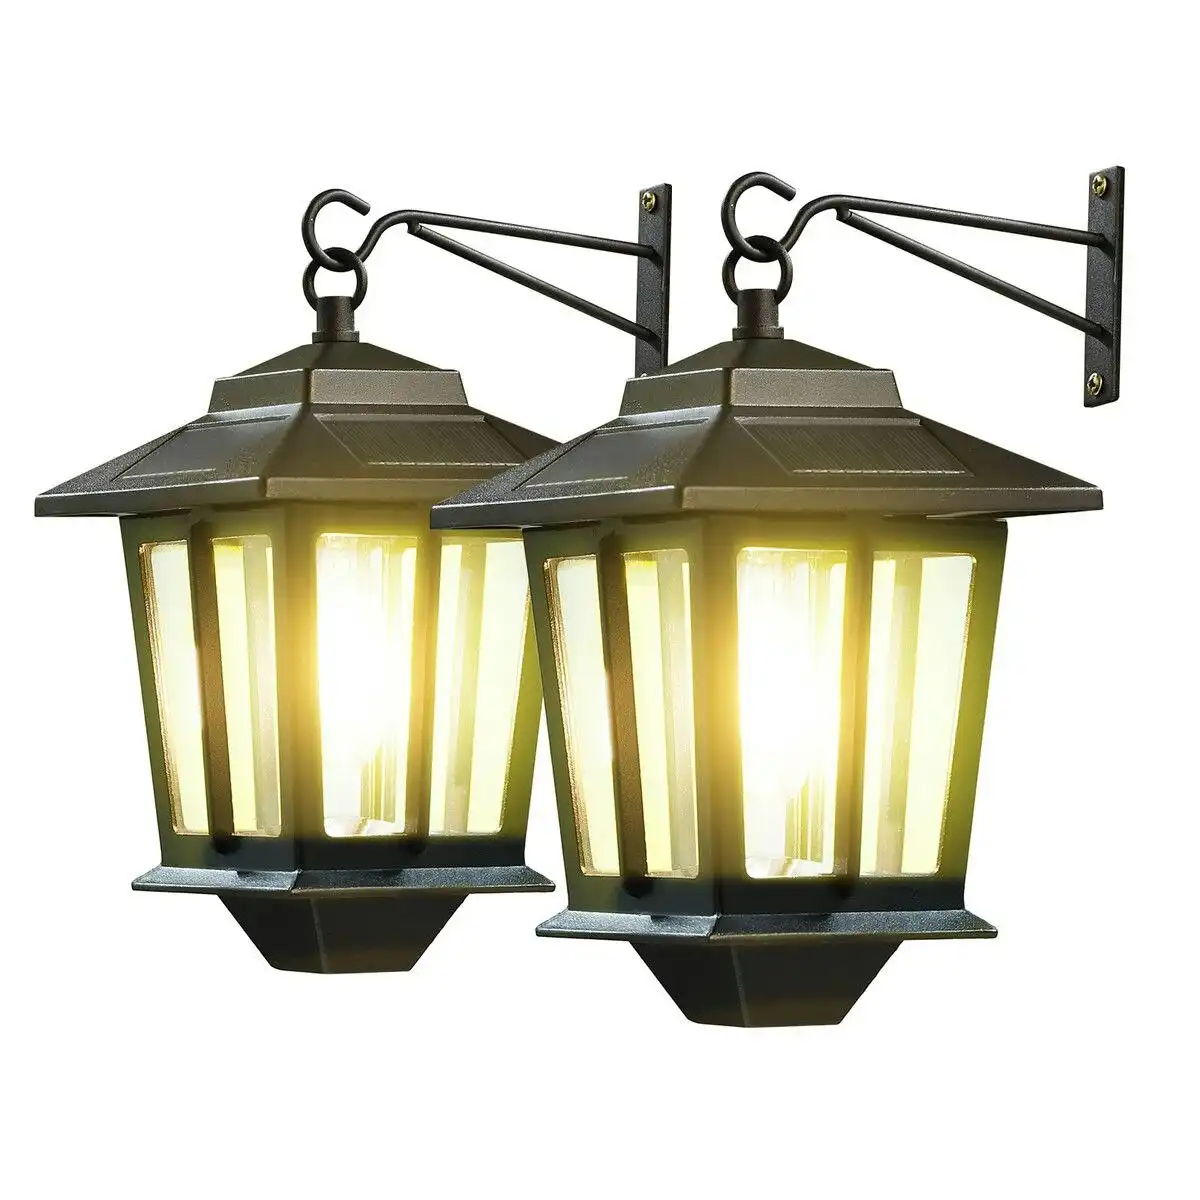 Ausway Solar Outdoor Wall Light Sconce Hanging Lantern Garden Outside Lamp Patio Fence Porch Waterproof with Light Sensor 2PCS